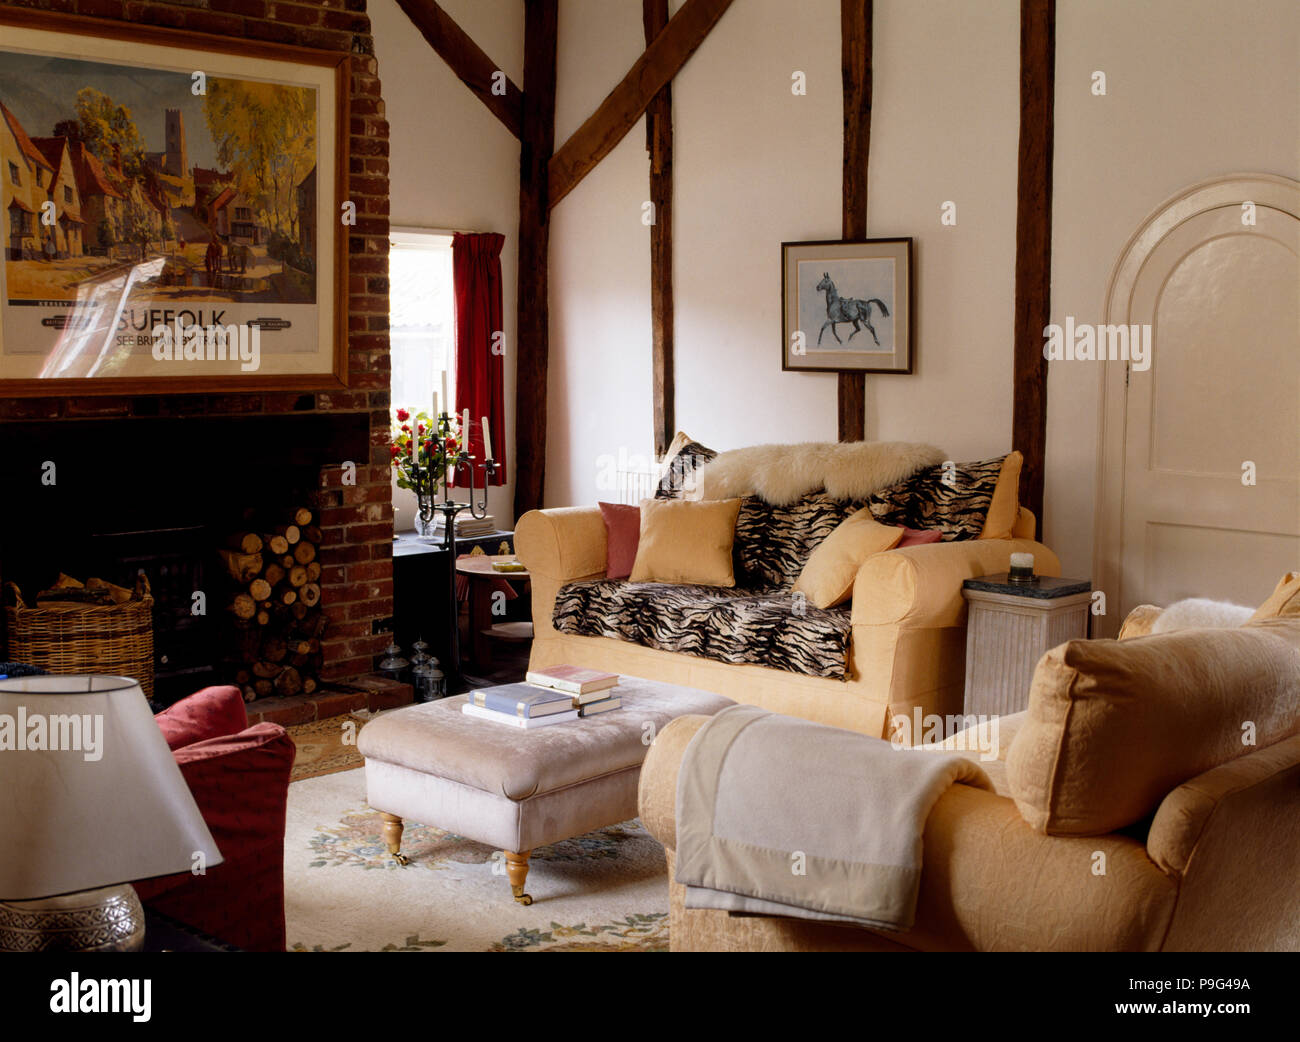 Animal print and sheepskin throws on cream sofas in a cottage sitting room with an ottoman stool Stock Photo